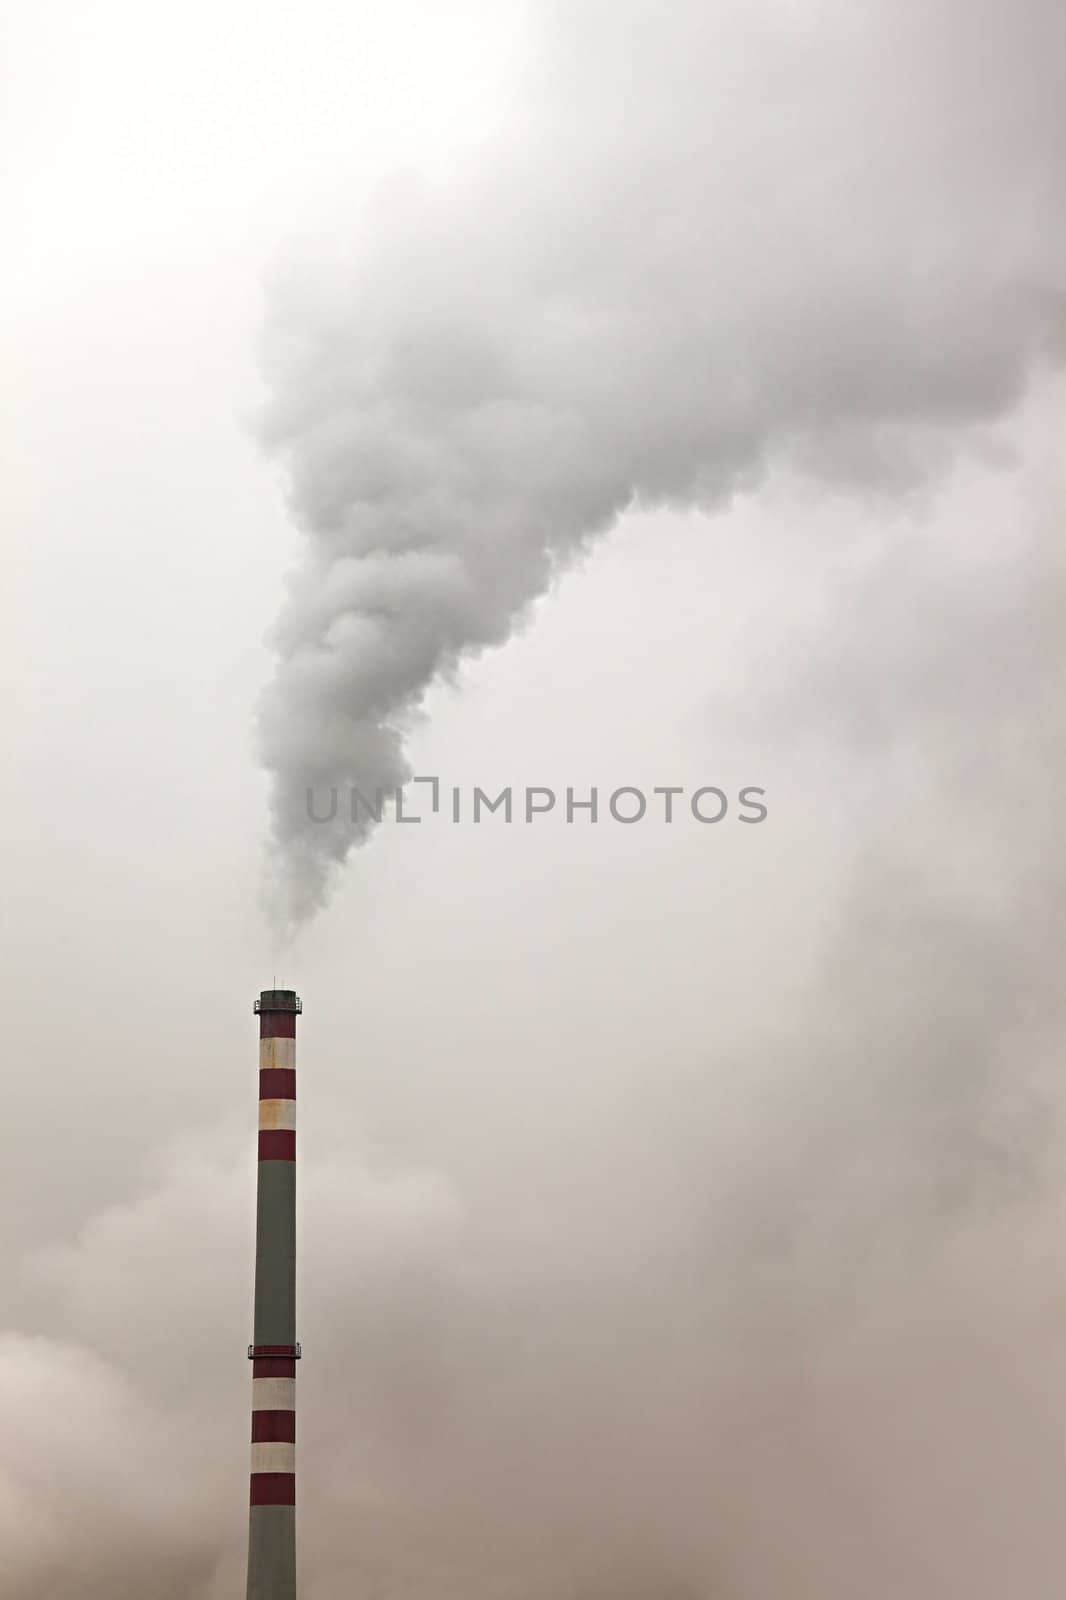 Thick smoke rising from an industrial chimney